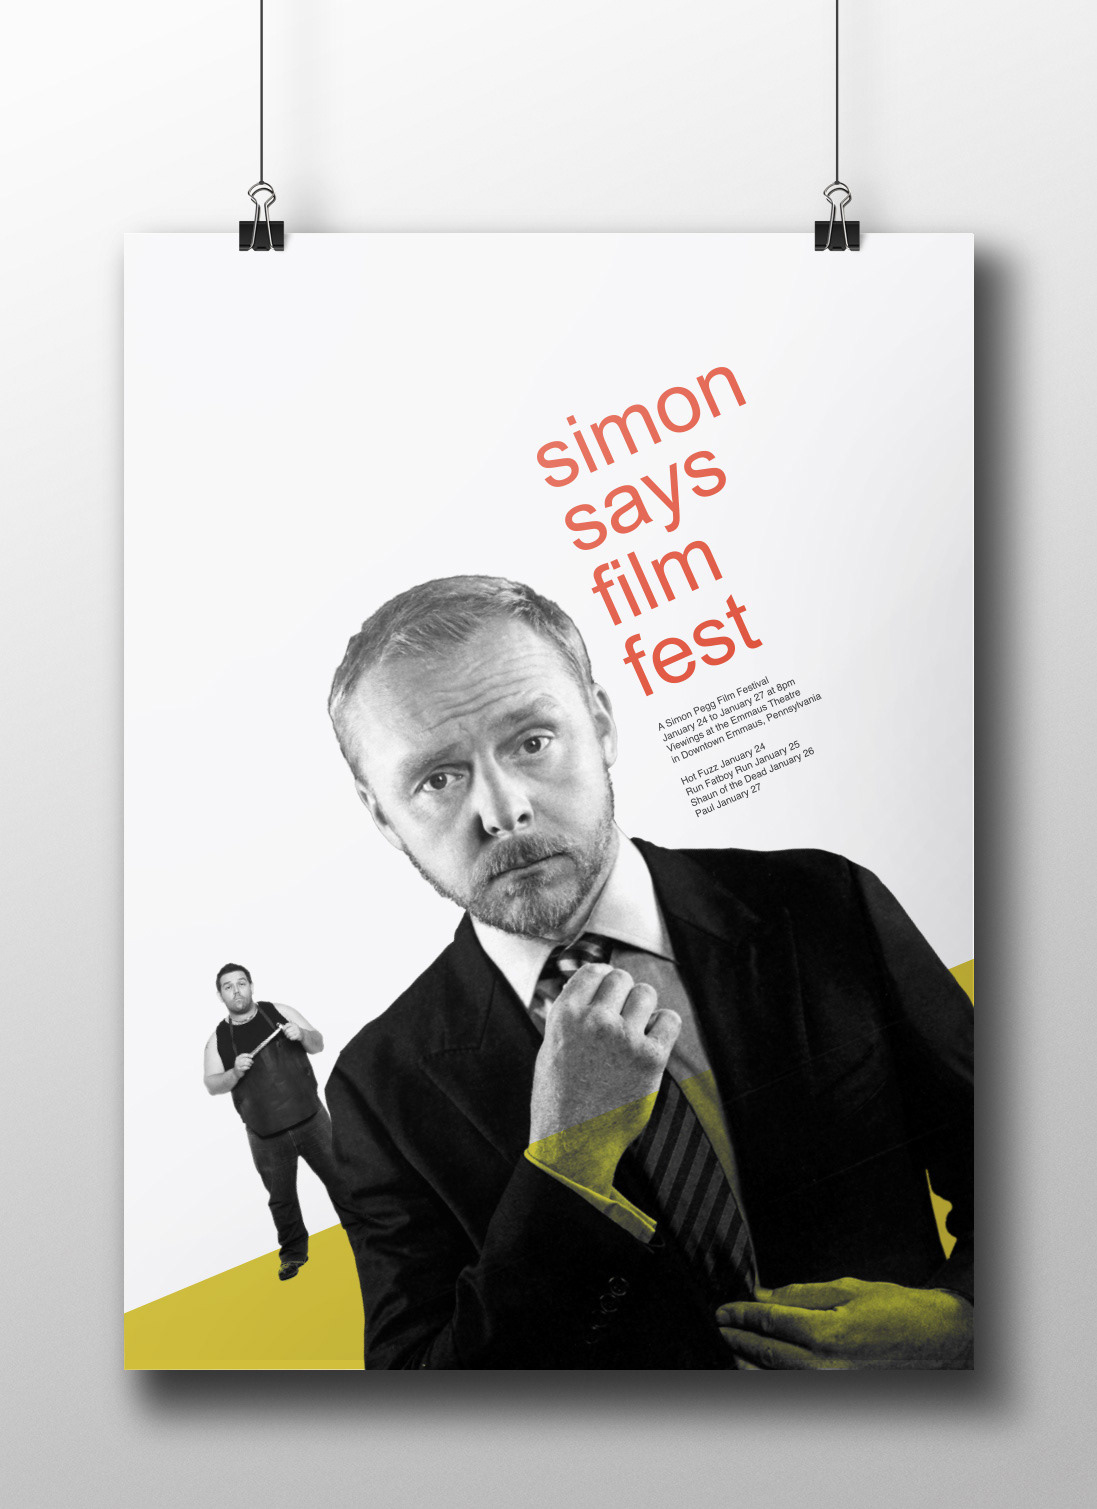 poster Promotional poster campaign film festival Simon Pegg